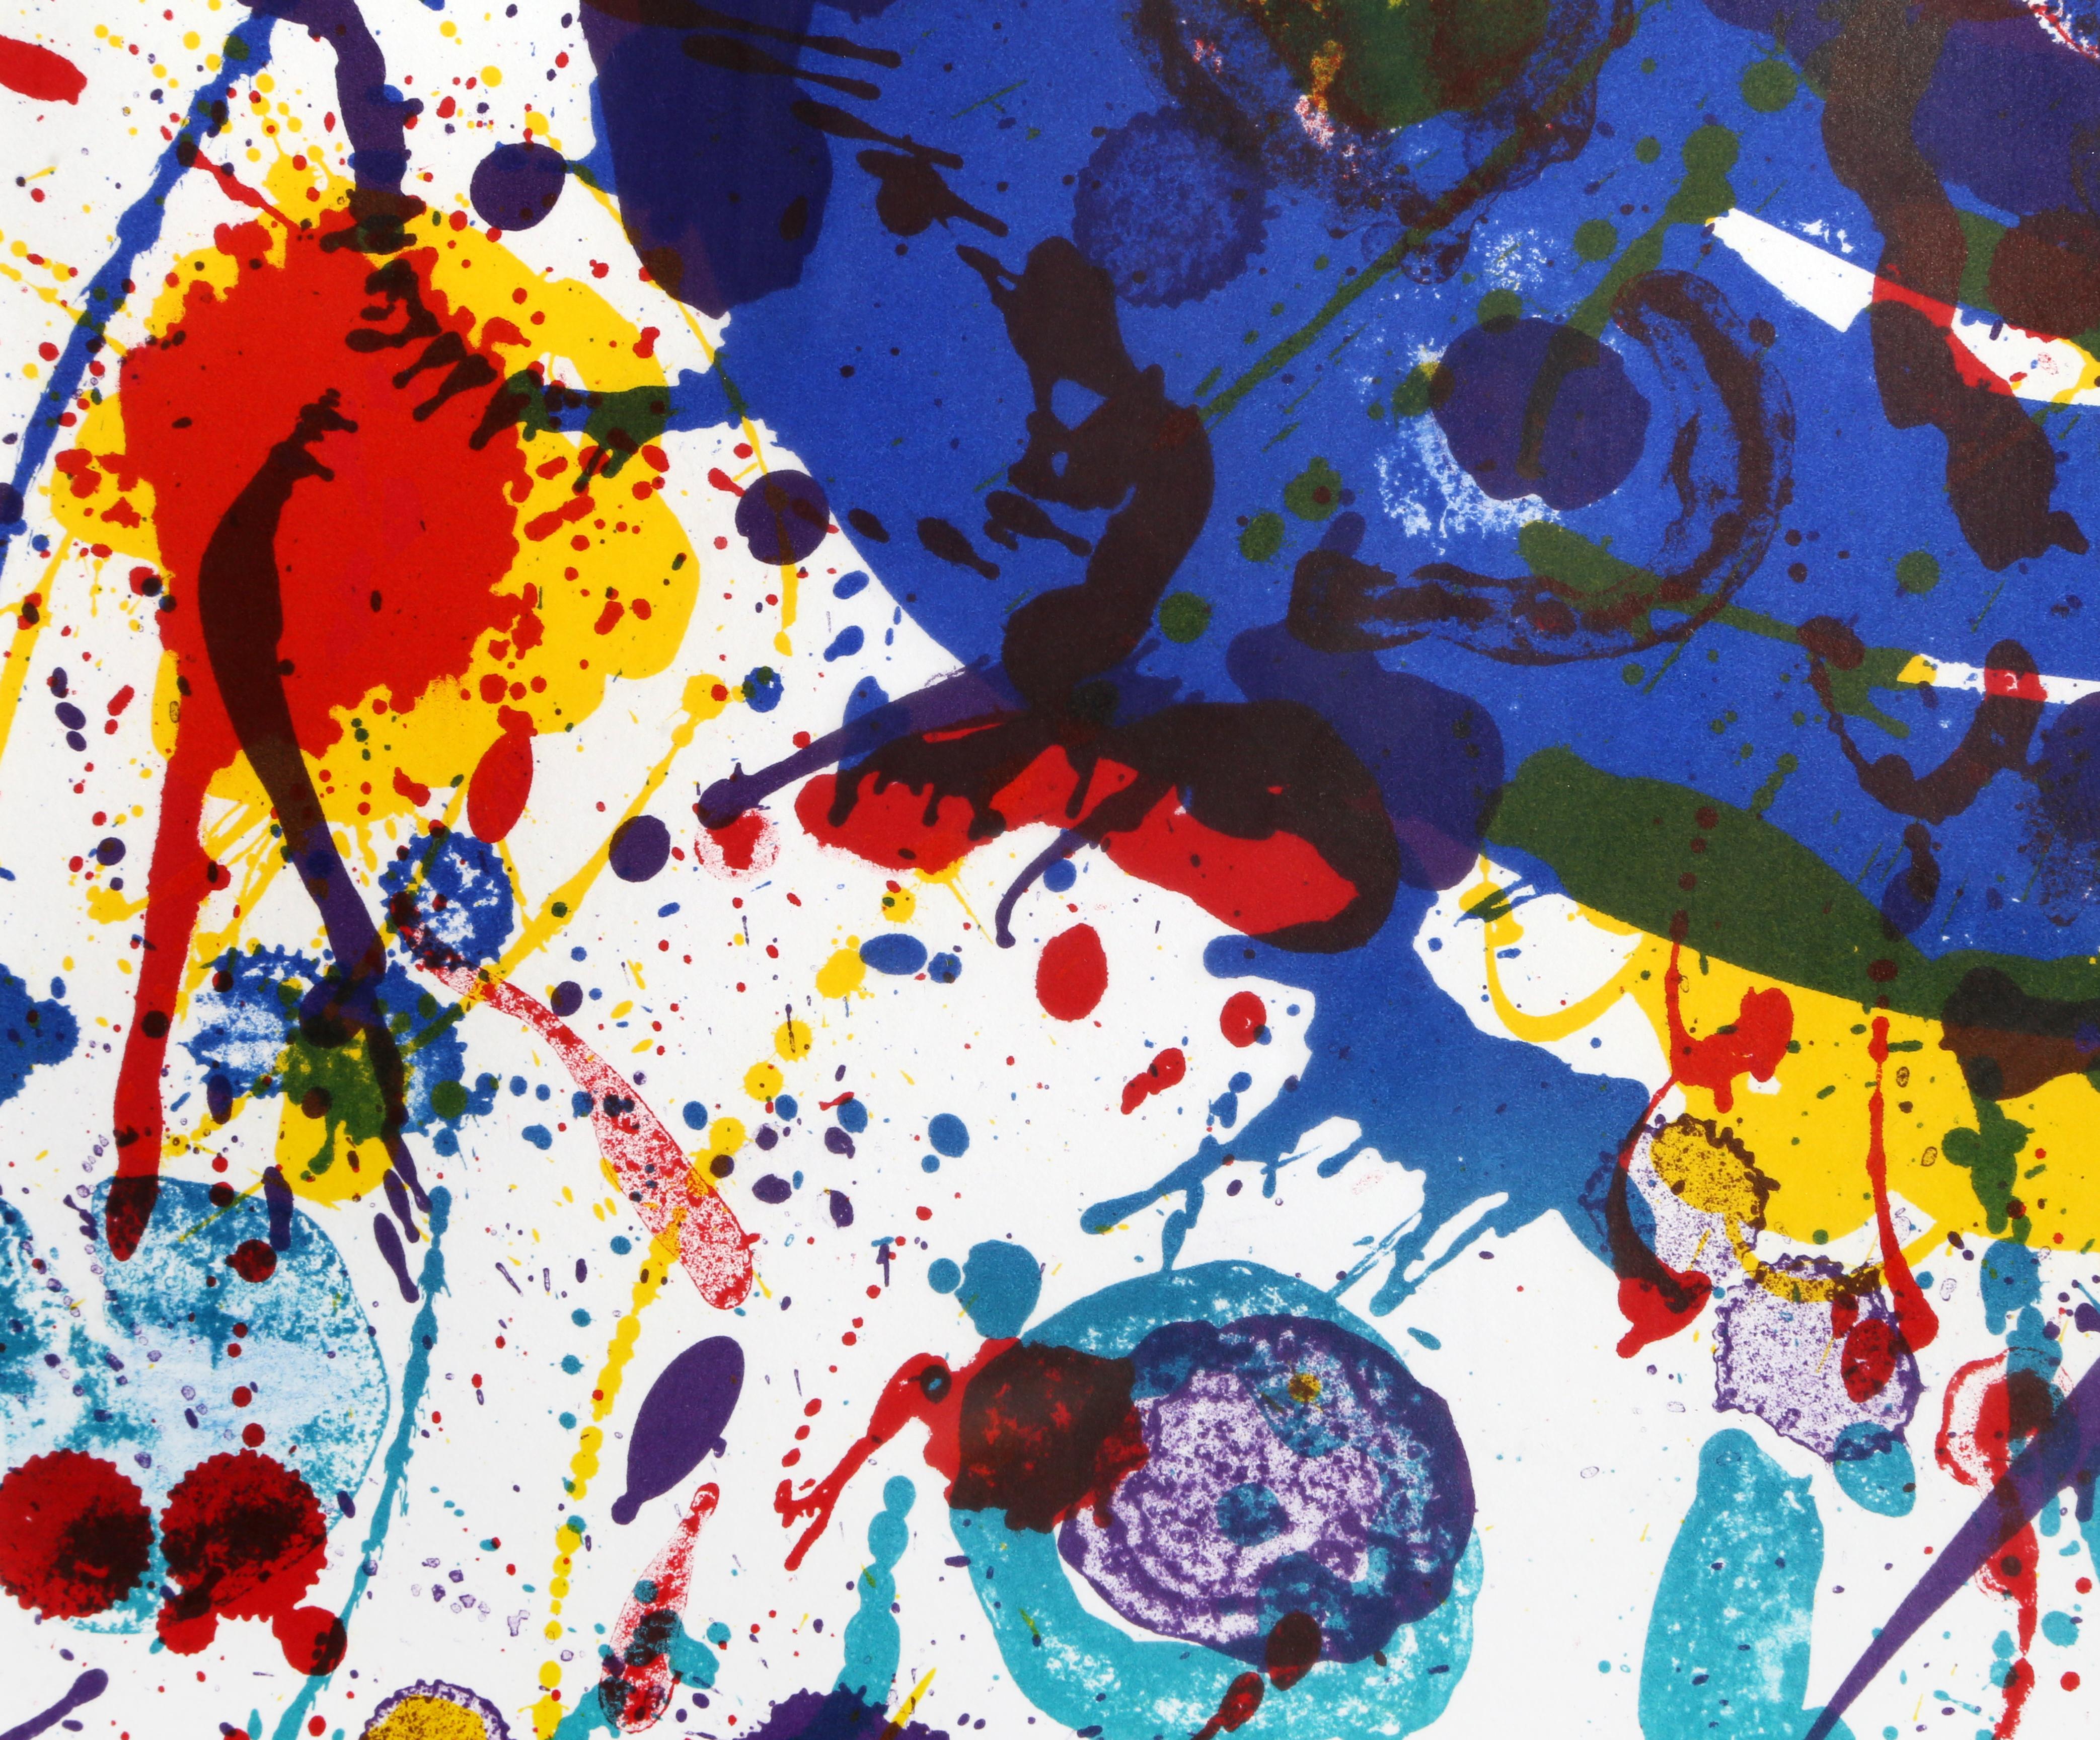 Untitled (SF-316)
Sam Francis, American (1923–1994)
Portfolio: Michael Waldberg: Sky Poems
Date: 1986
Lithograph on Rives BFK, signed and numbered in pencil
Edition of HC 12/20, 176
Size: 29.88 x 22 in. (75.9 x 55.88 cm)
Printer: Desjobert,